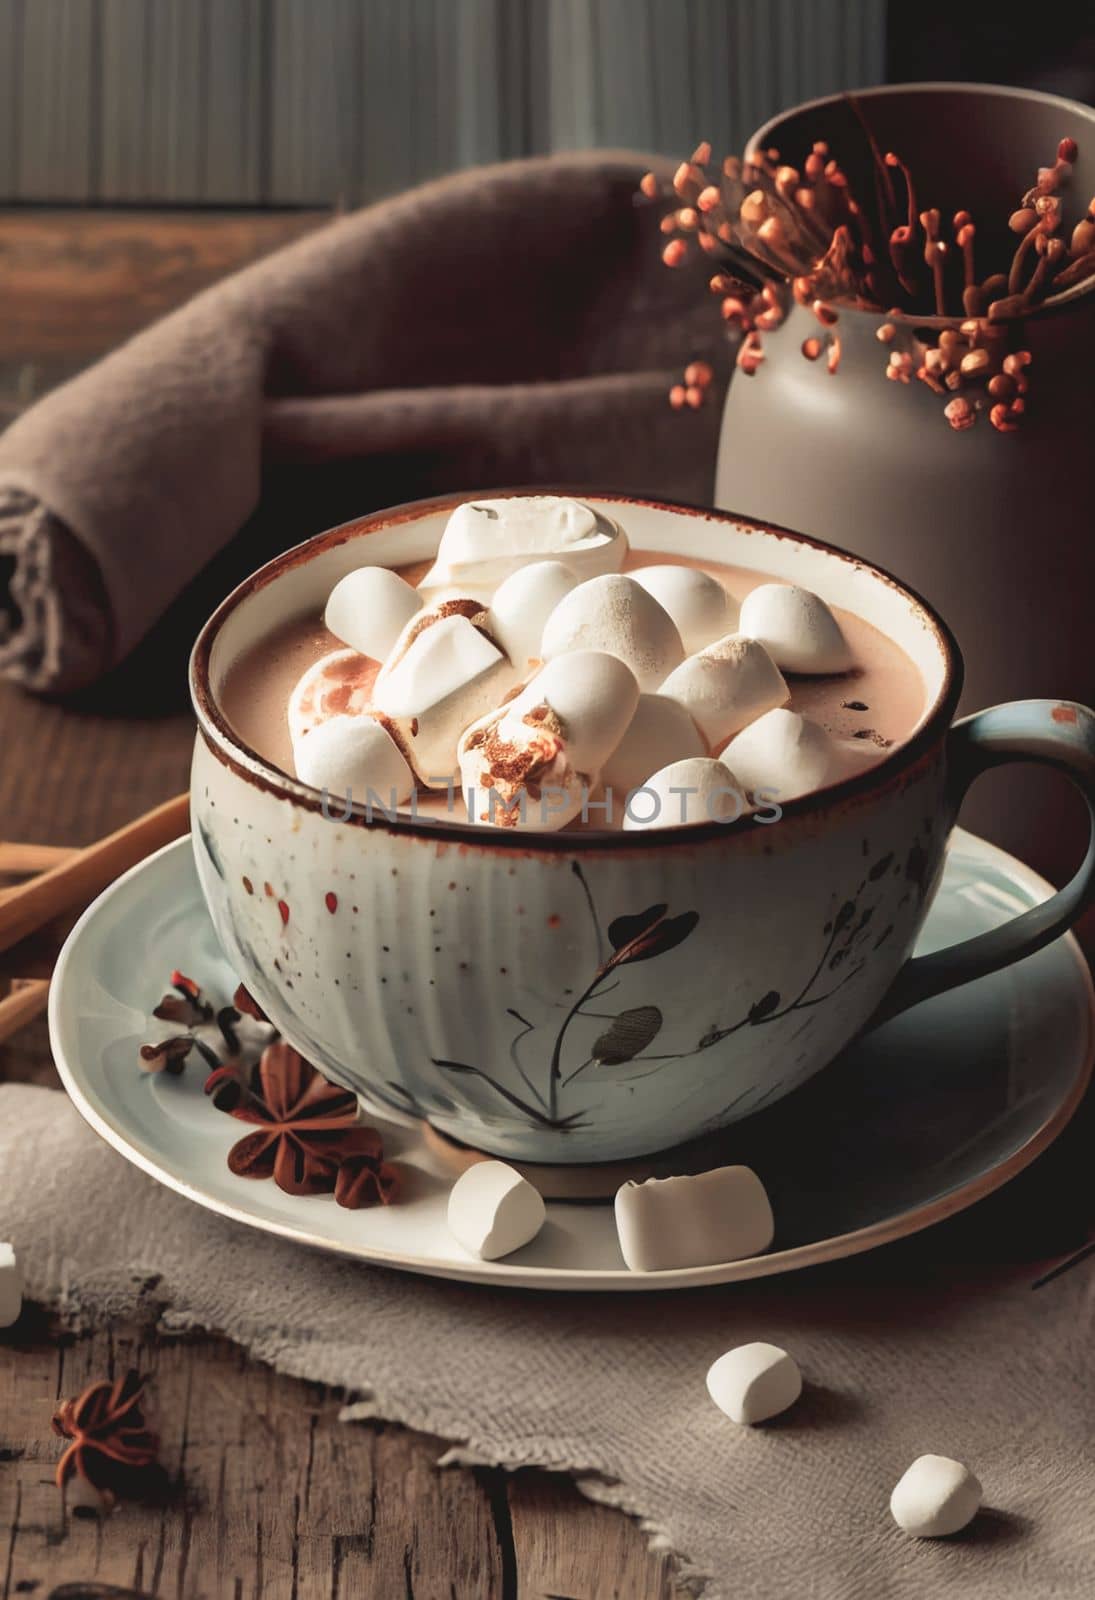 Savor a mug of hot cocoa surrounded by wintery holiday decor. Perfect for a cozy New Year's celebration. by FokasuArt